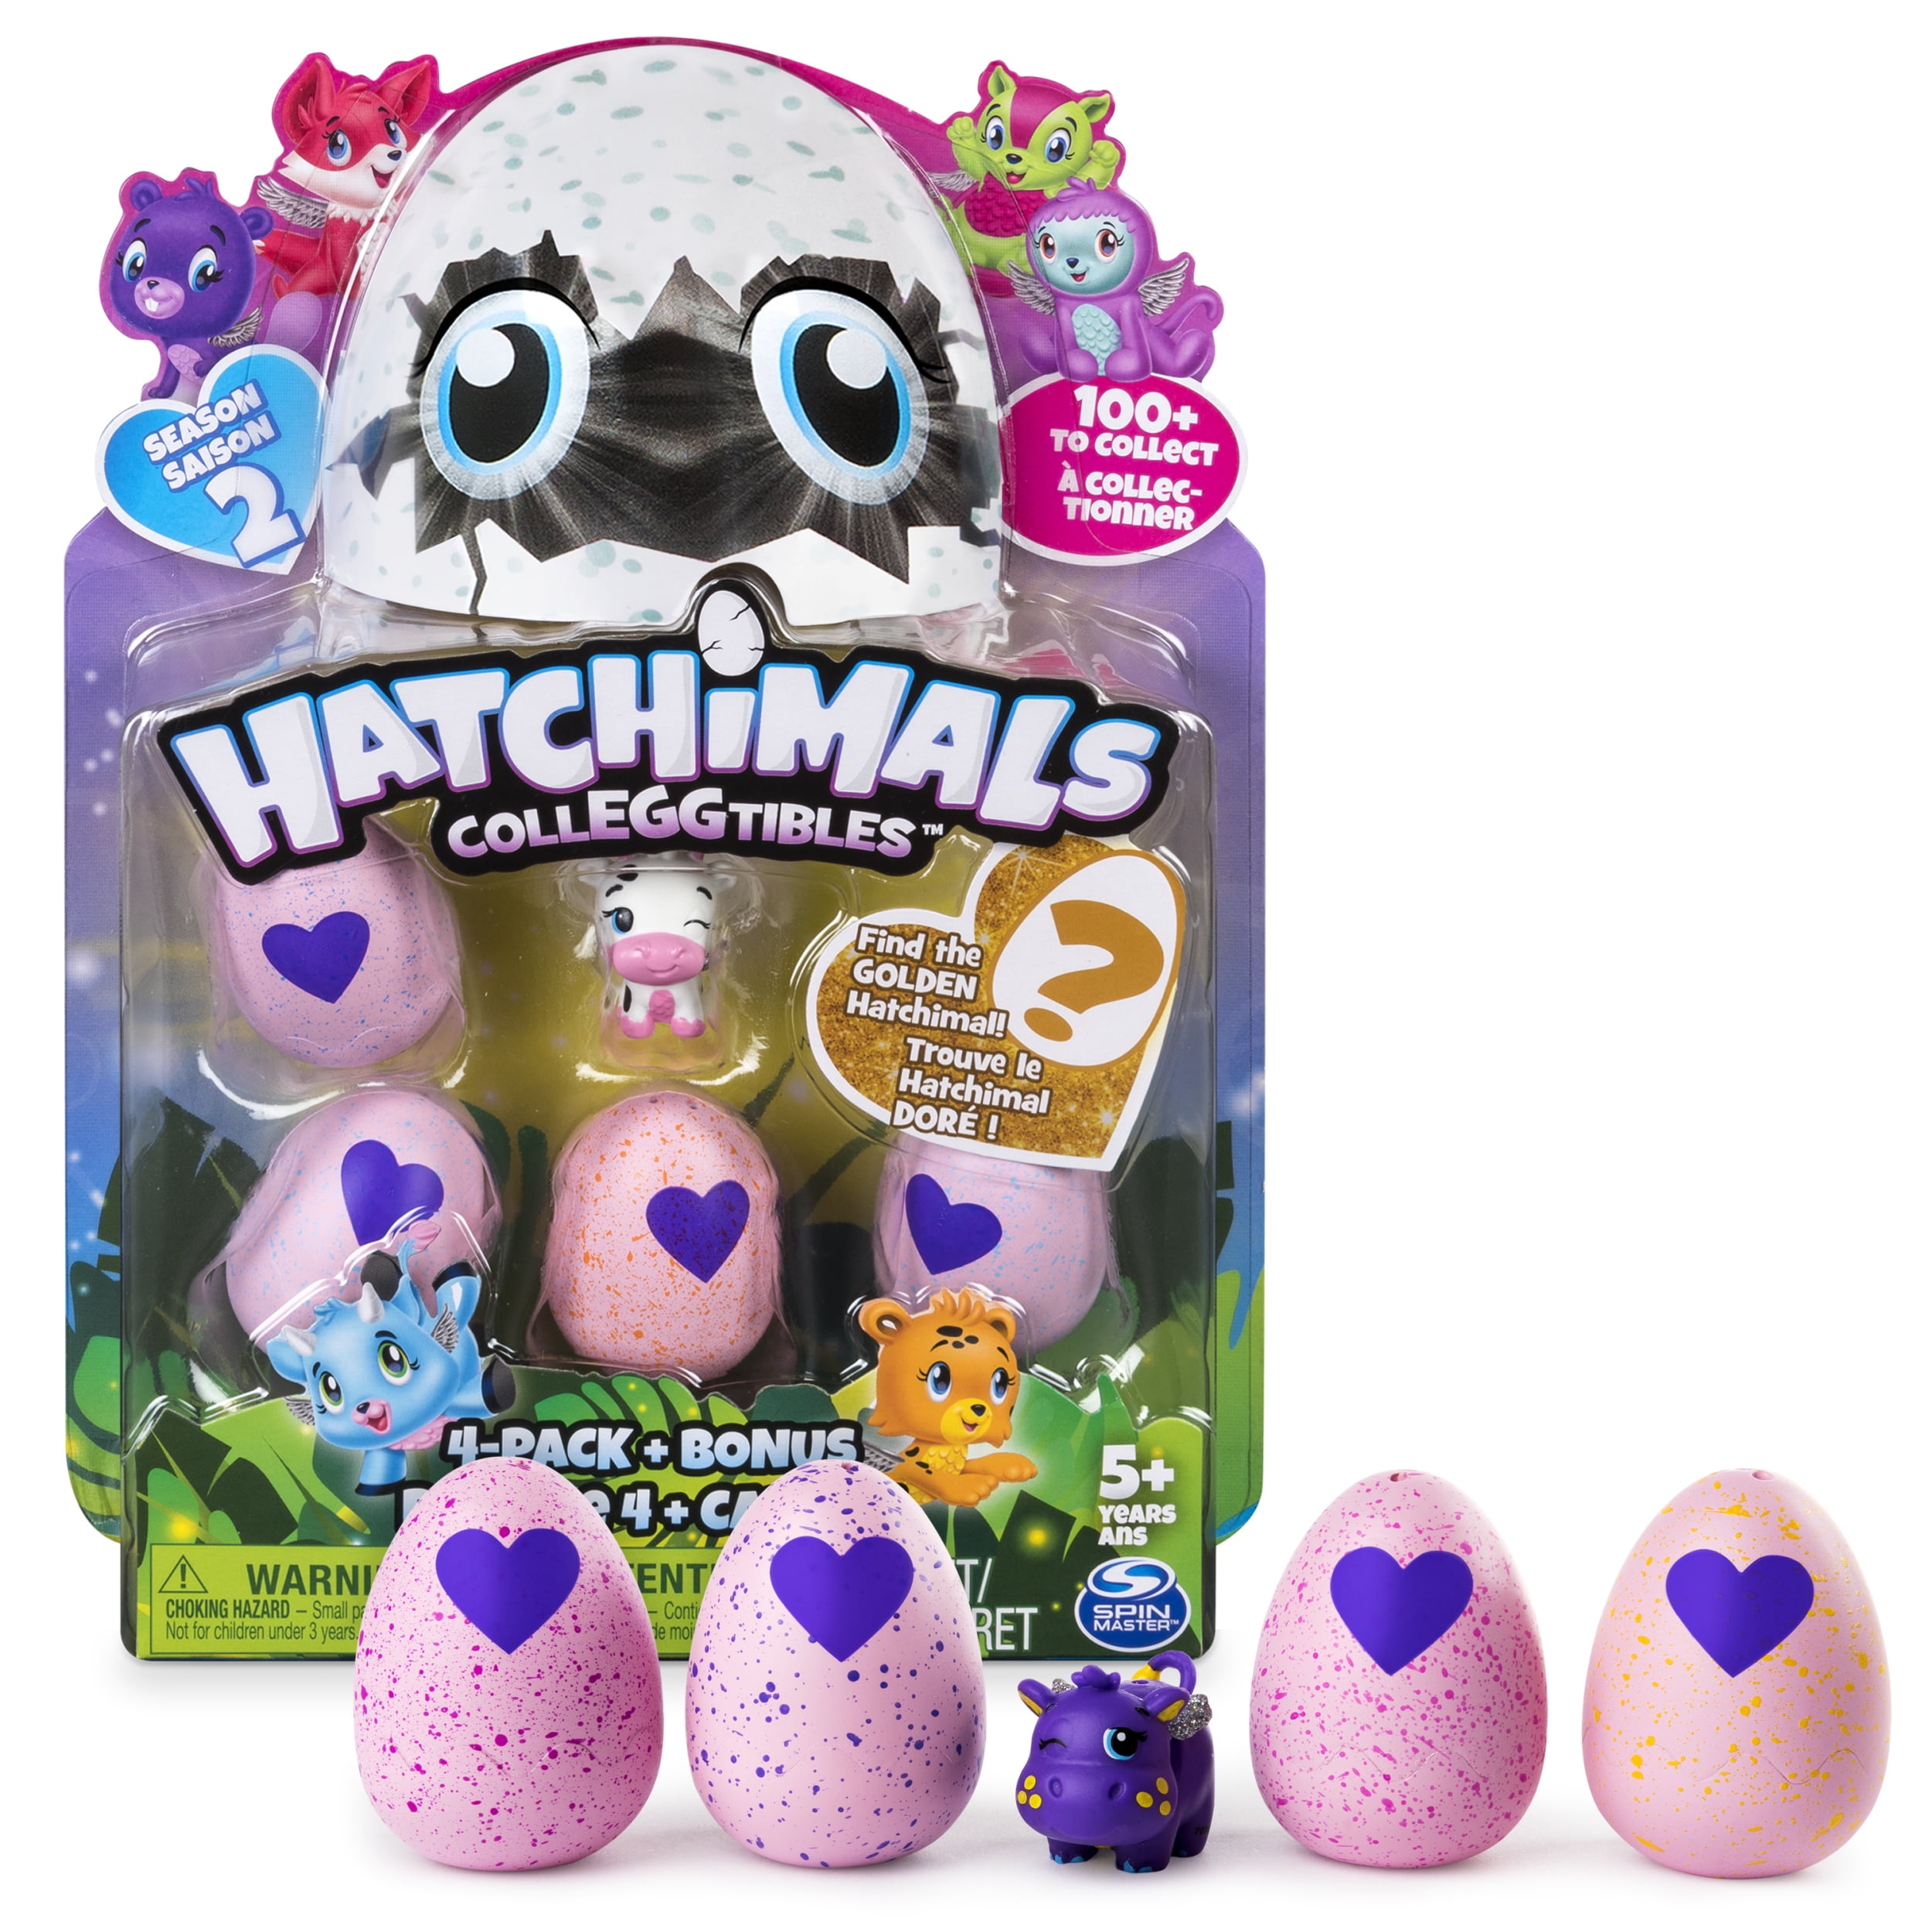 Hatchimals Colleggtibles Season 2 2pack Egg Carton Citrus Coast by Spin Master for sale online 